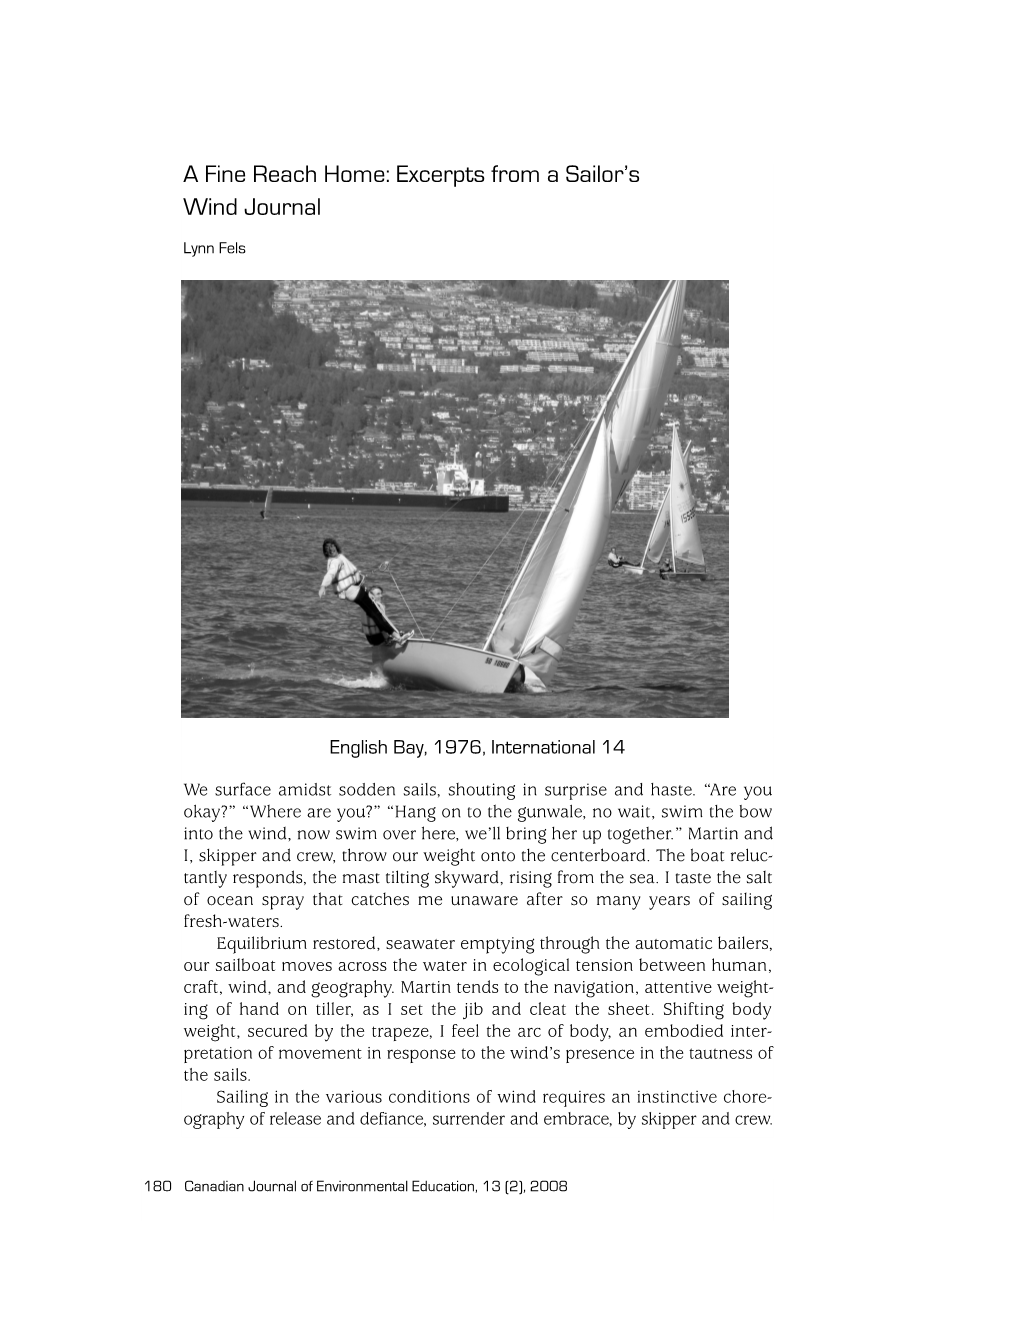 A Fine Reach Home: Excerpts from a Sailor's Wind Journal